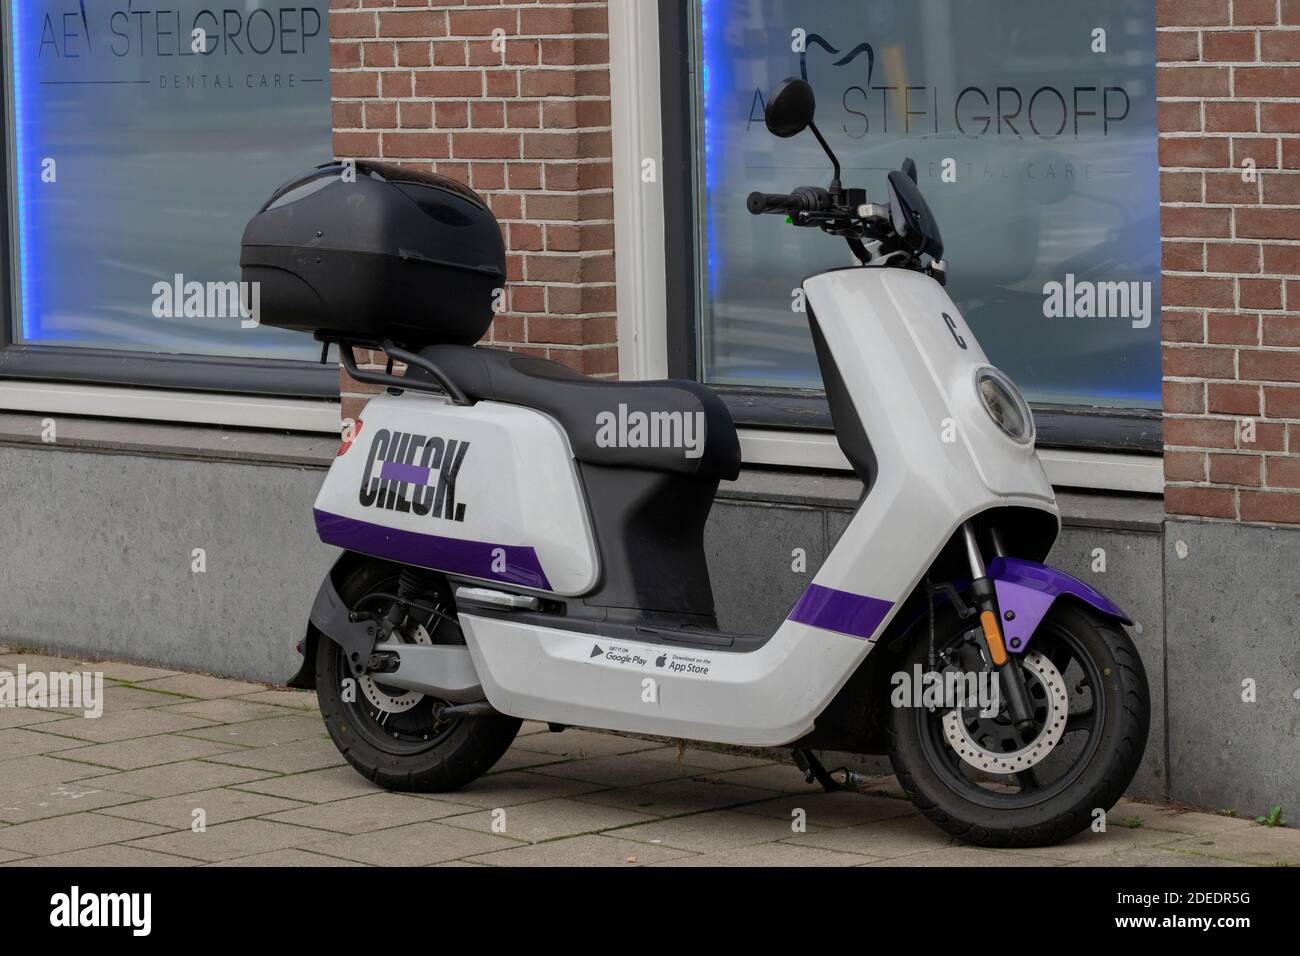 Rental Scooter At Amsterdam Netherlands 27-11-2020 Stock Photo -